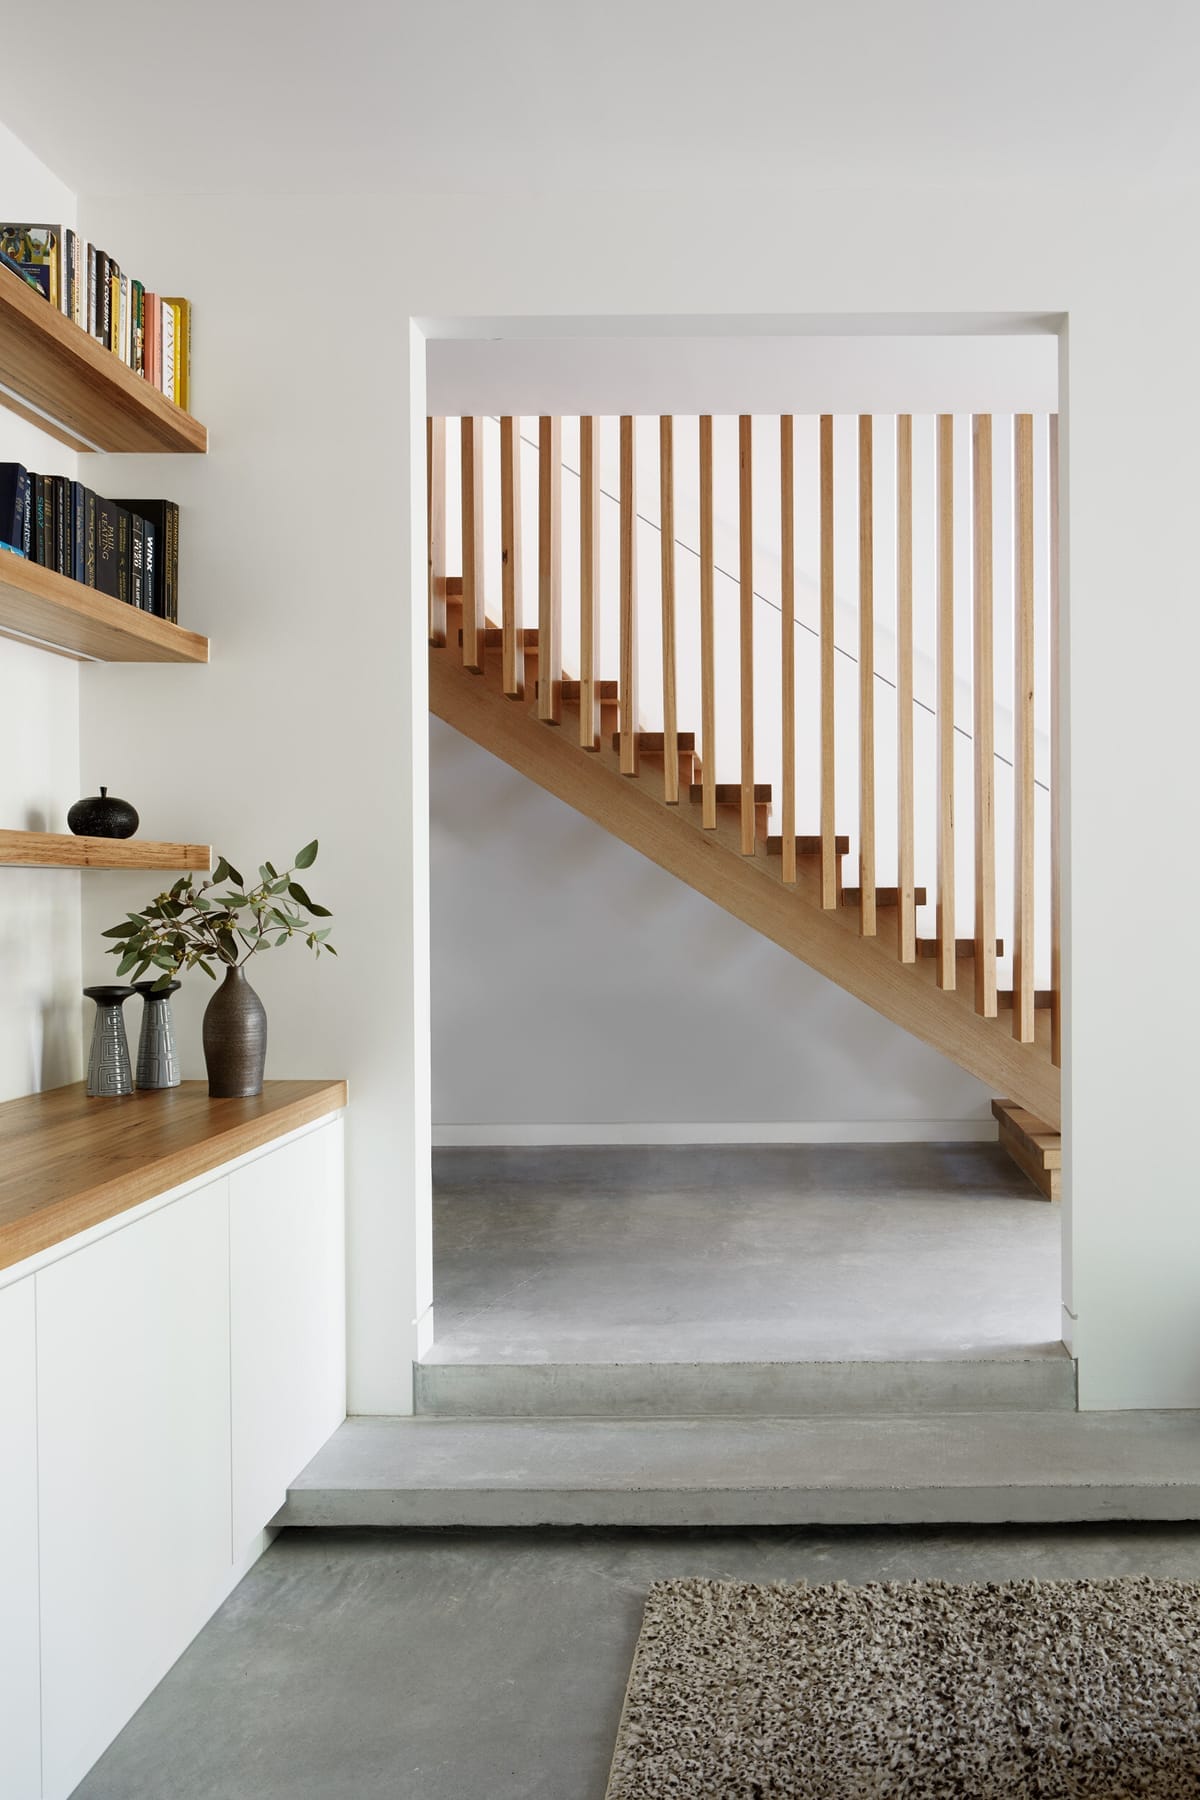 Laurel Grove by Kirsten Johnstone Architecture. Photography by Tatjana Plitt. Timber staircase through doorway. 